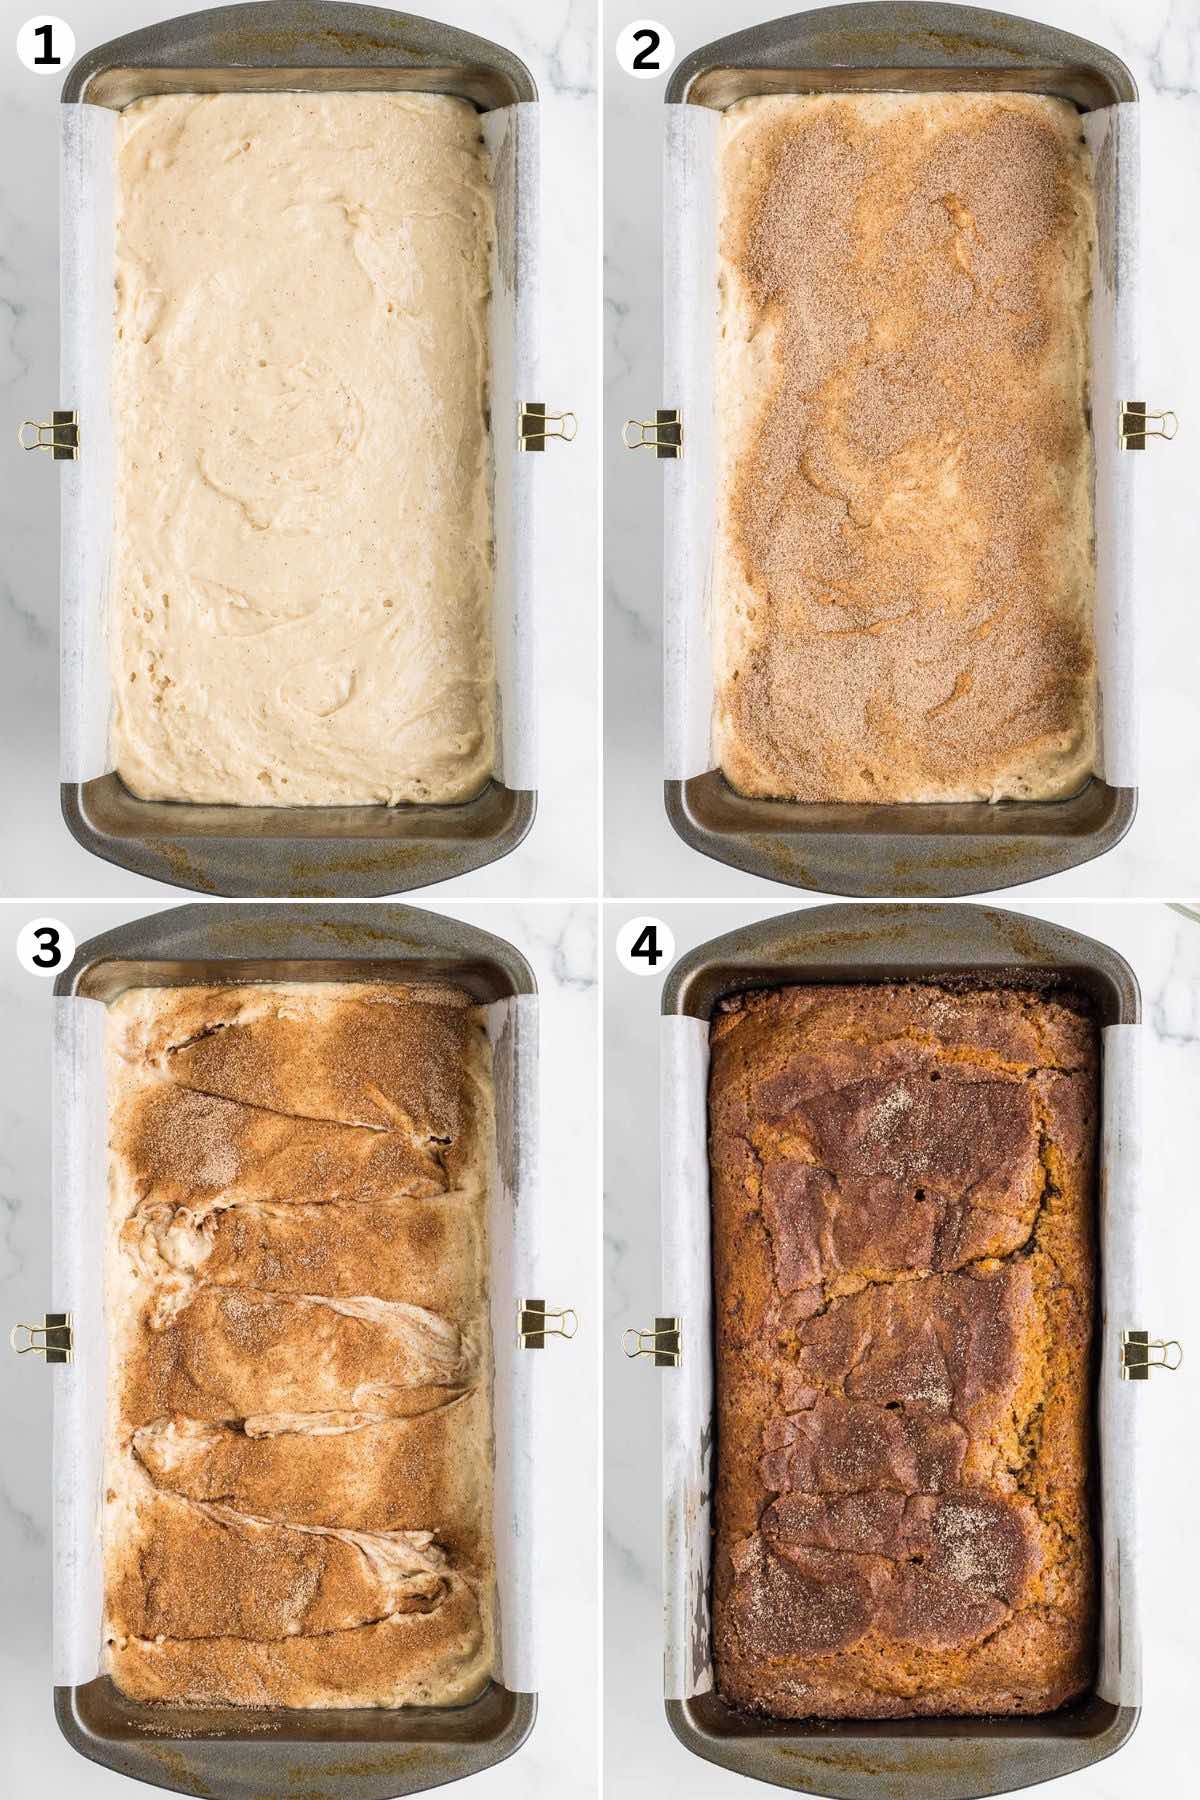 cinnamon bread mixture in a loaf pan. sprinkle cinnamon sugar mixture on top. swirl it around with a knife and bake.